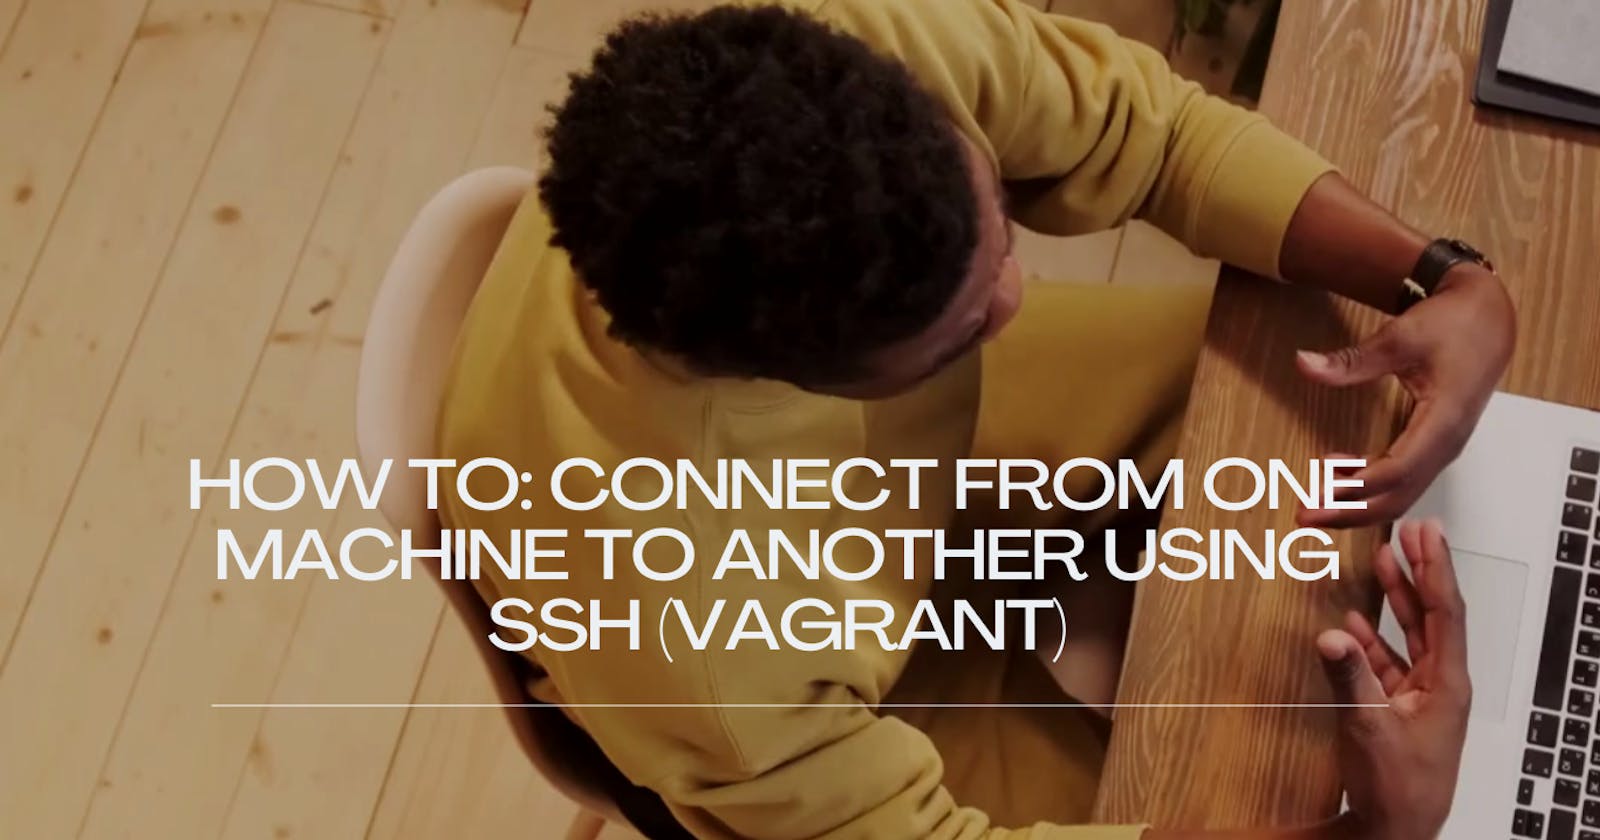 How to: Connect from one machine to another using SSH (Vagrant)